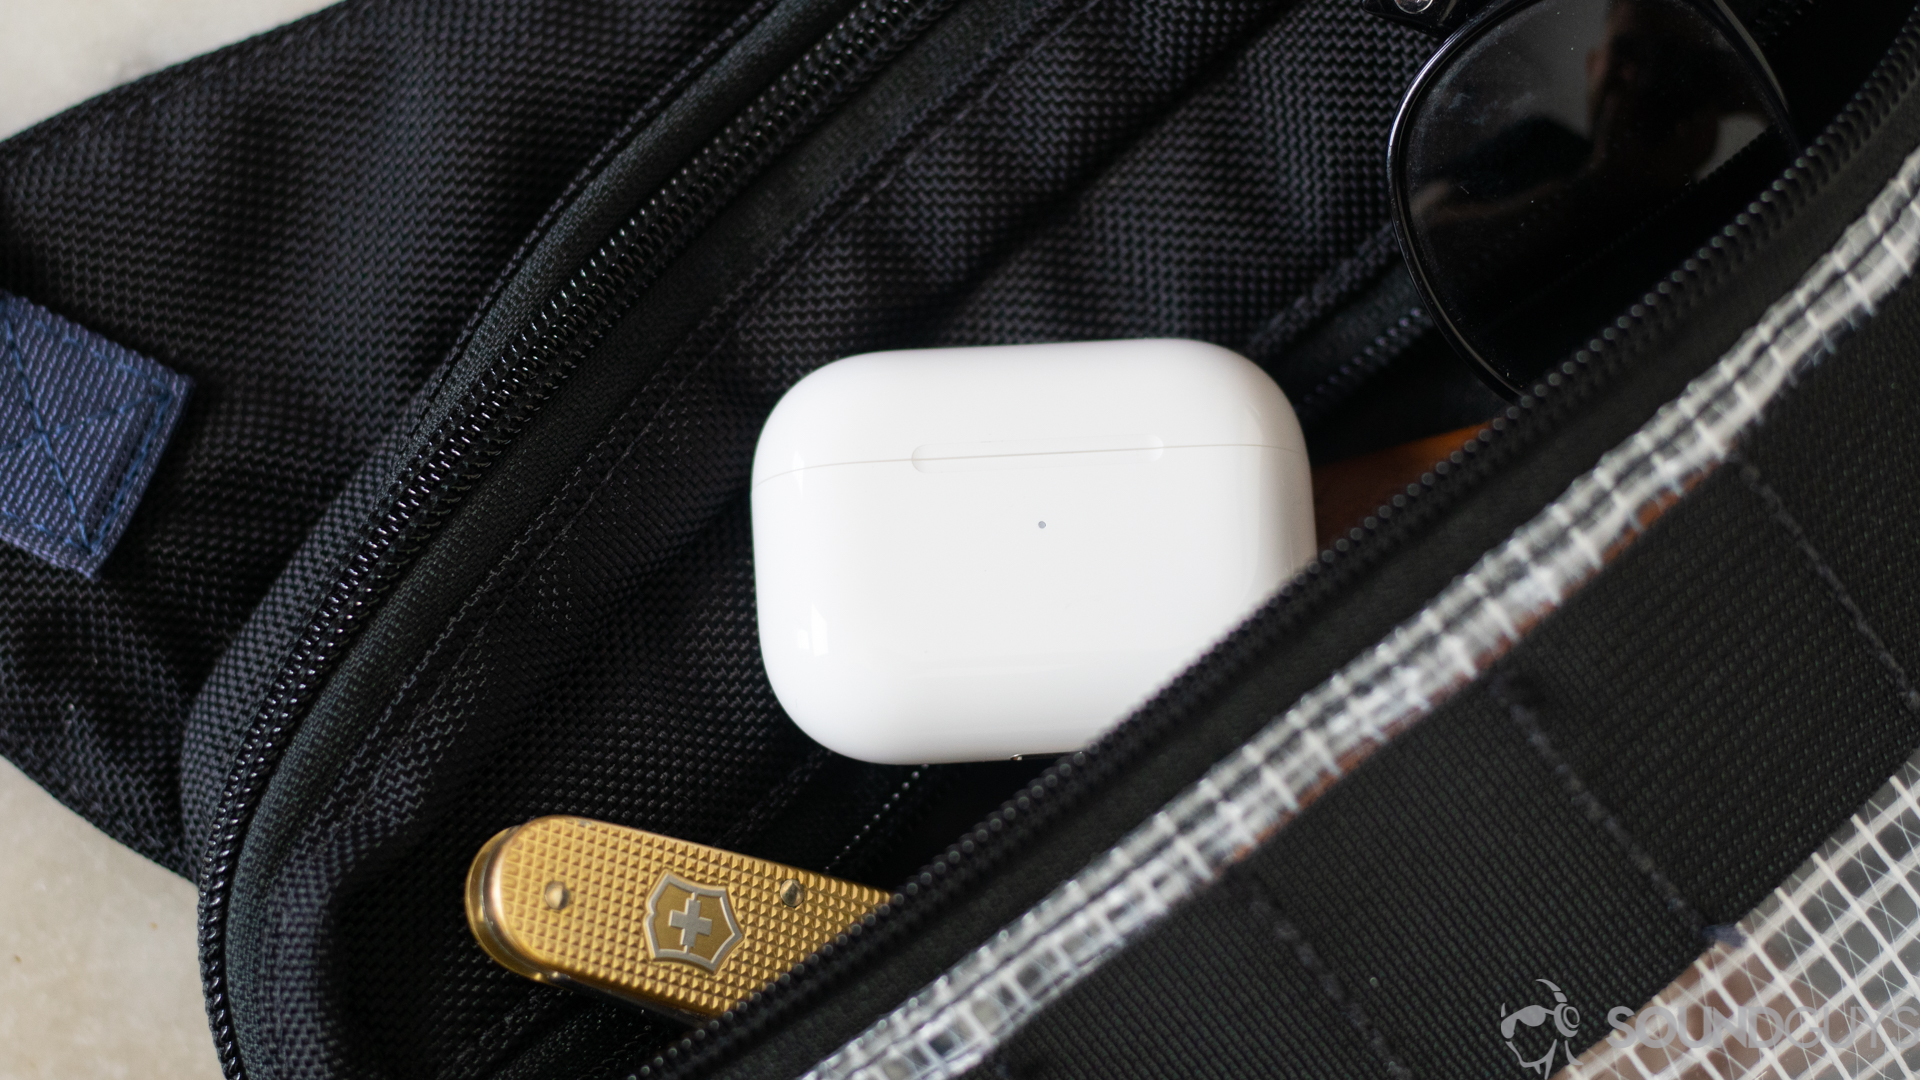 Shot of the charging case next to a gold swiss army knife and sunglasses in the pocket of a bag.